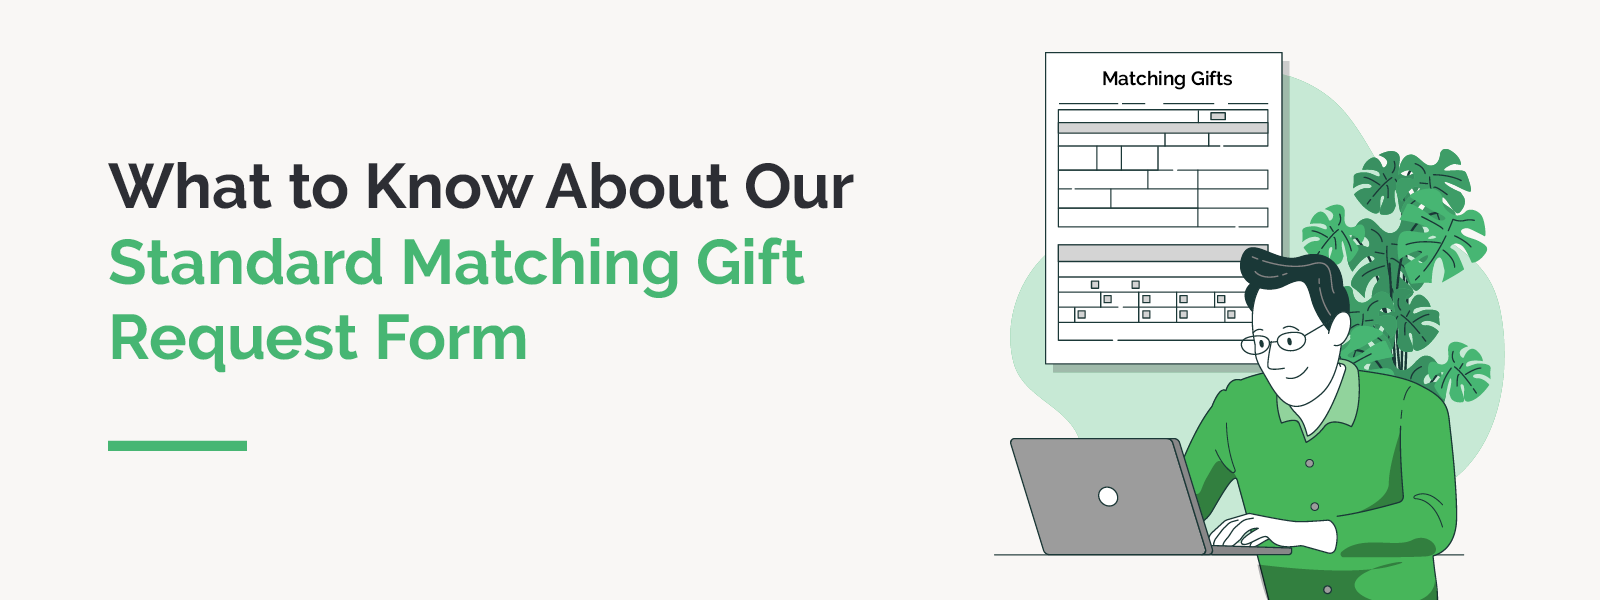 How to Use Matching Gift Forms 101: A Nonprofit Guide - Getting